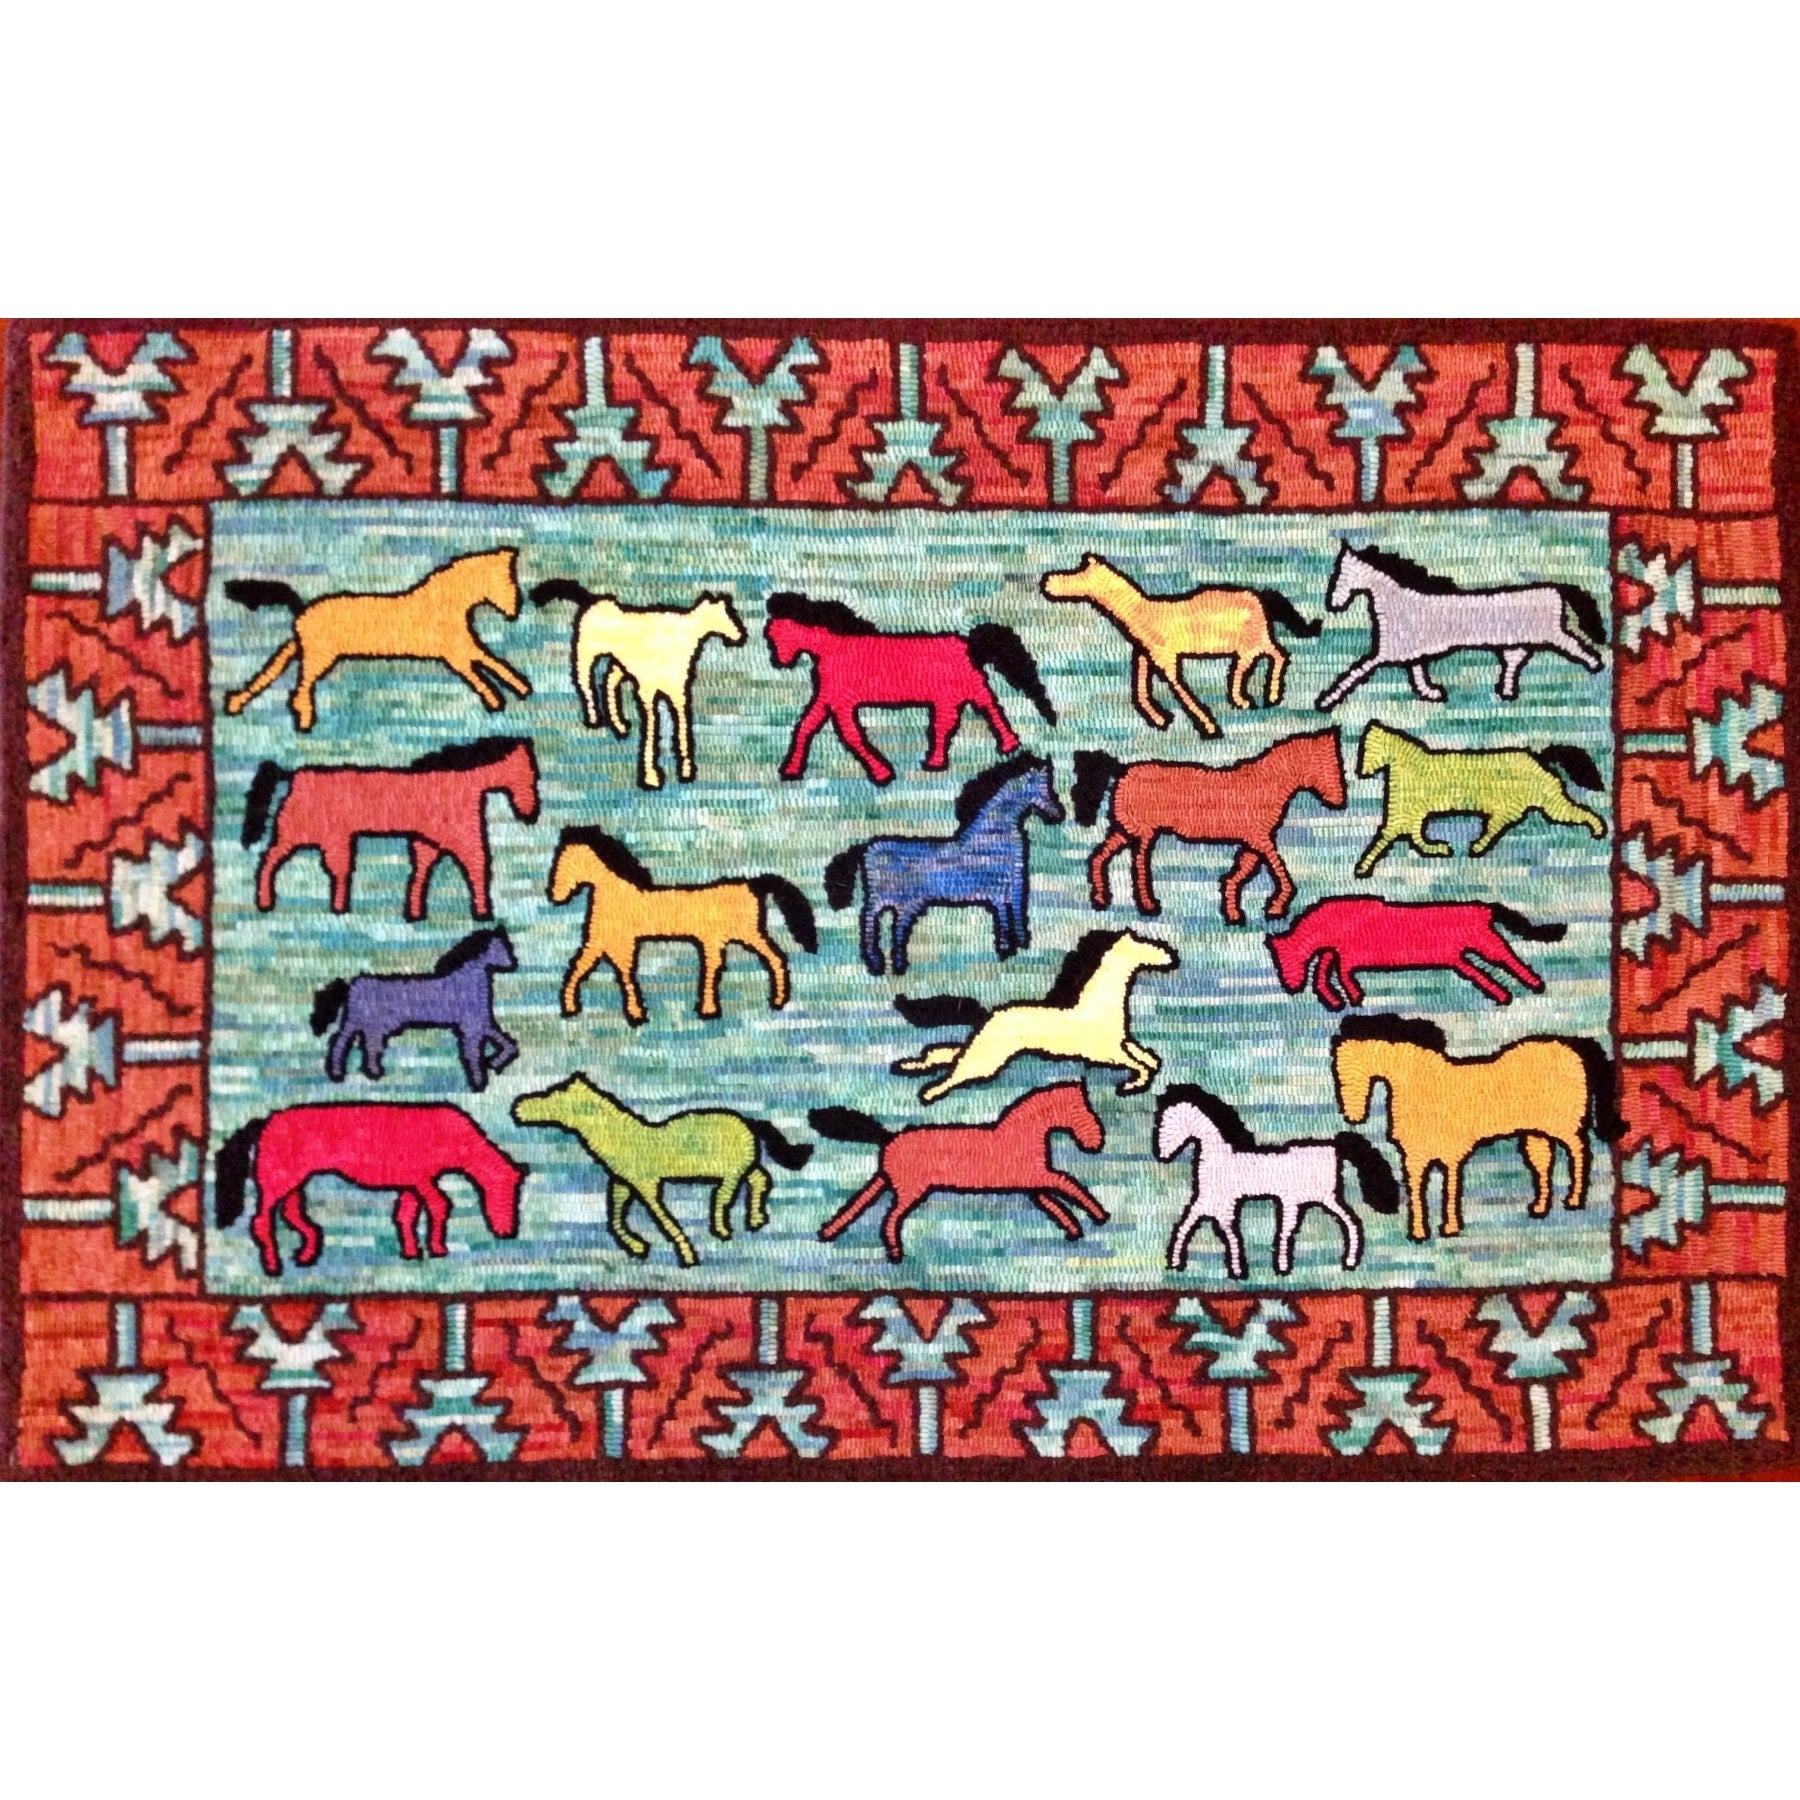 Azarie Horses, rug hooked by Elise Roberts